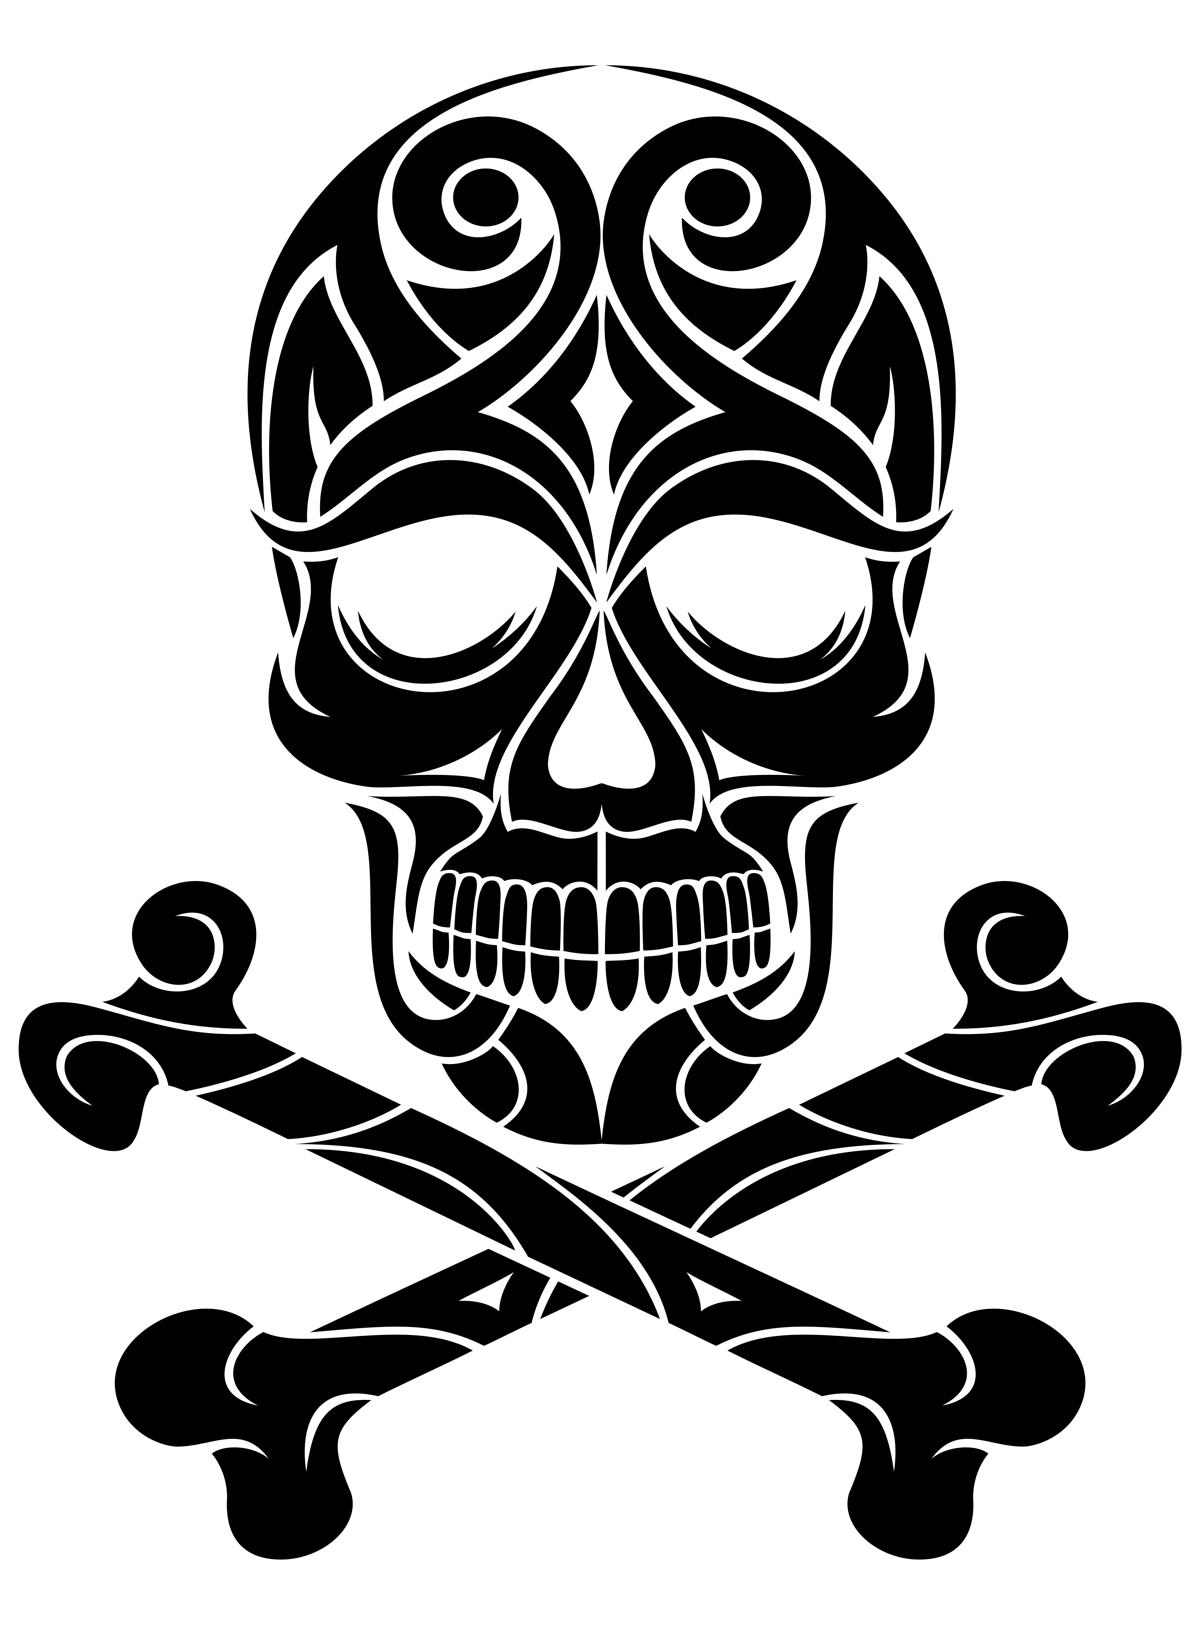 Discover 73+ skull and bones tattoo - in.cdgdbentre